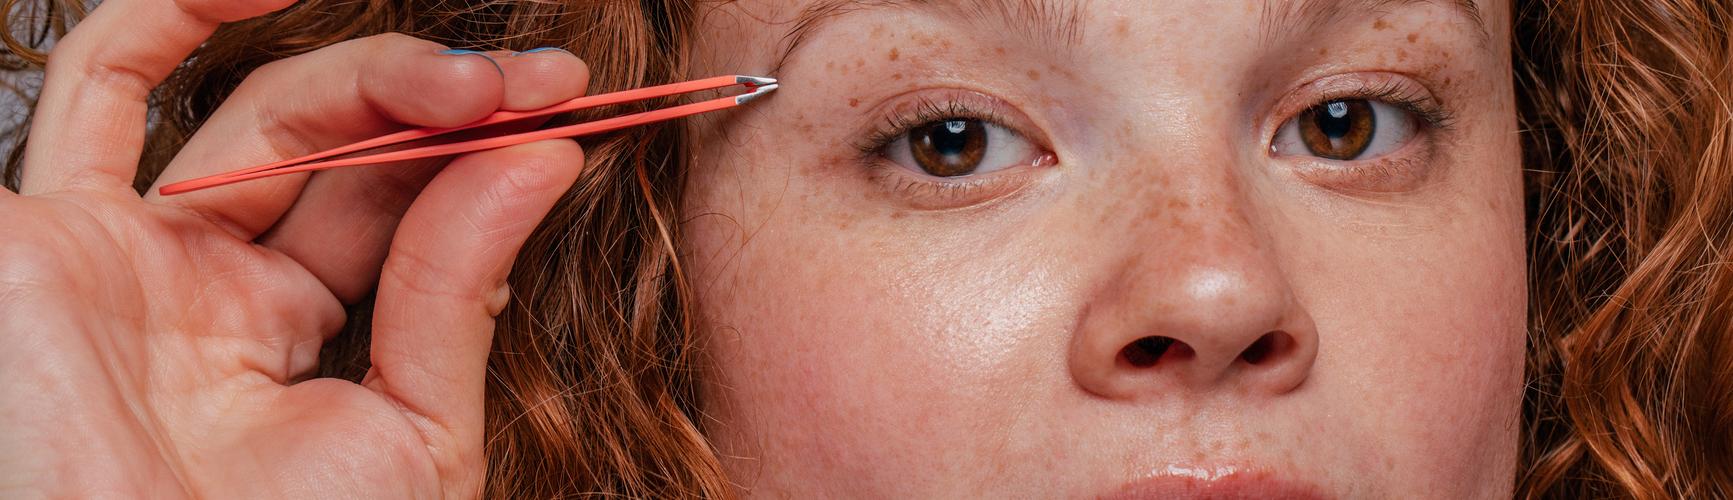 Get in shape: The incredible brow technique we can't believe we only just discovered